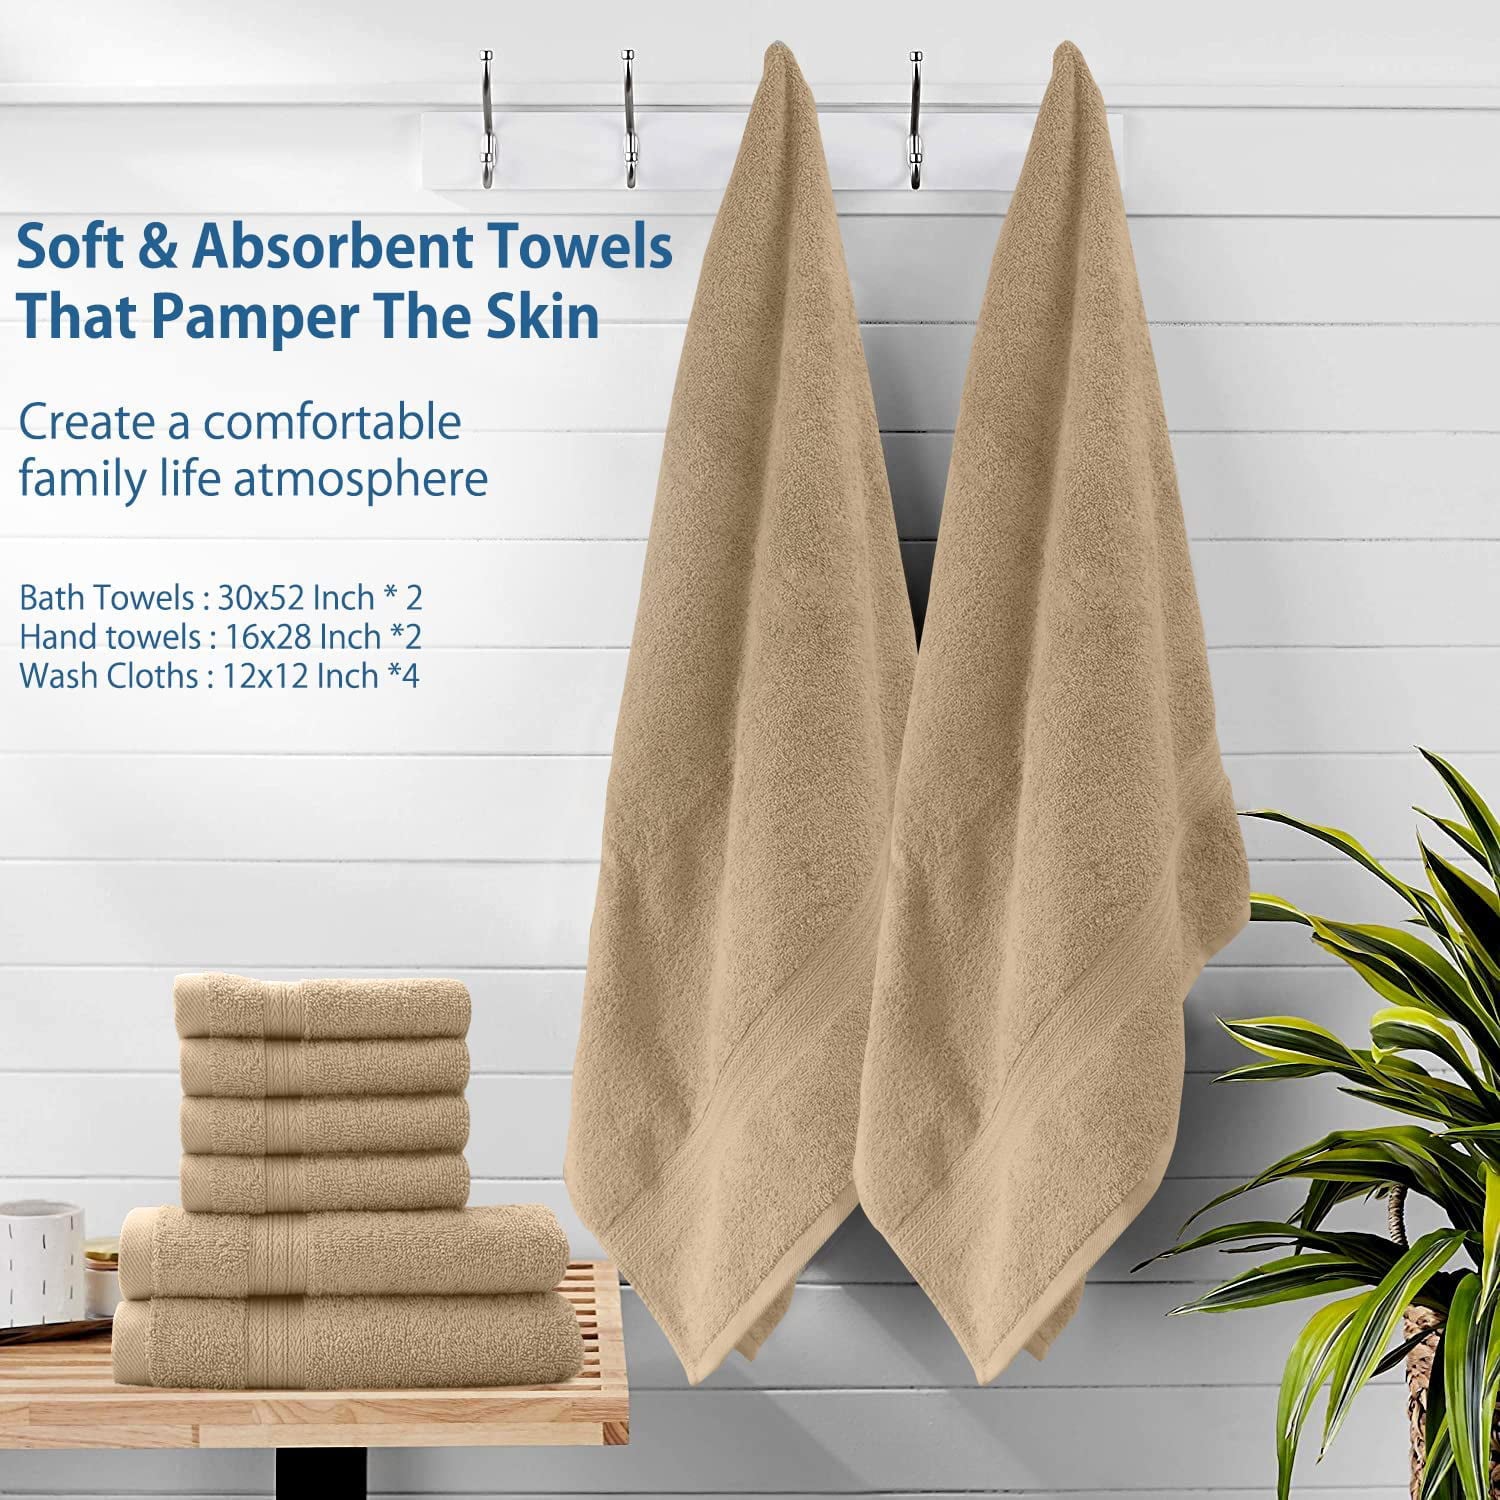 DAN RIVER 100% Cotton Bathroom Towel Set|2 Oversized Bath Towels 30x52| 2 Hand Towels 16x28| 4 Wash Cloths 12x12| Ideal for Home Hotel and Spa| Ultra Soft|Absorbent| Tan Towel Set|600 GSM| 8 Pc